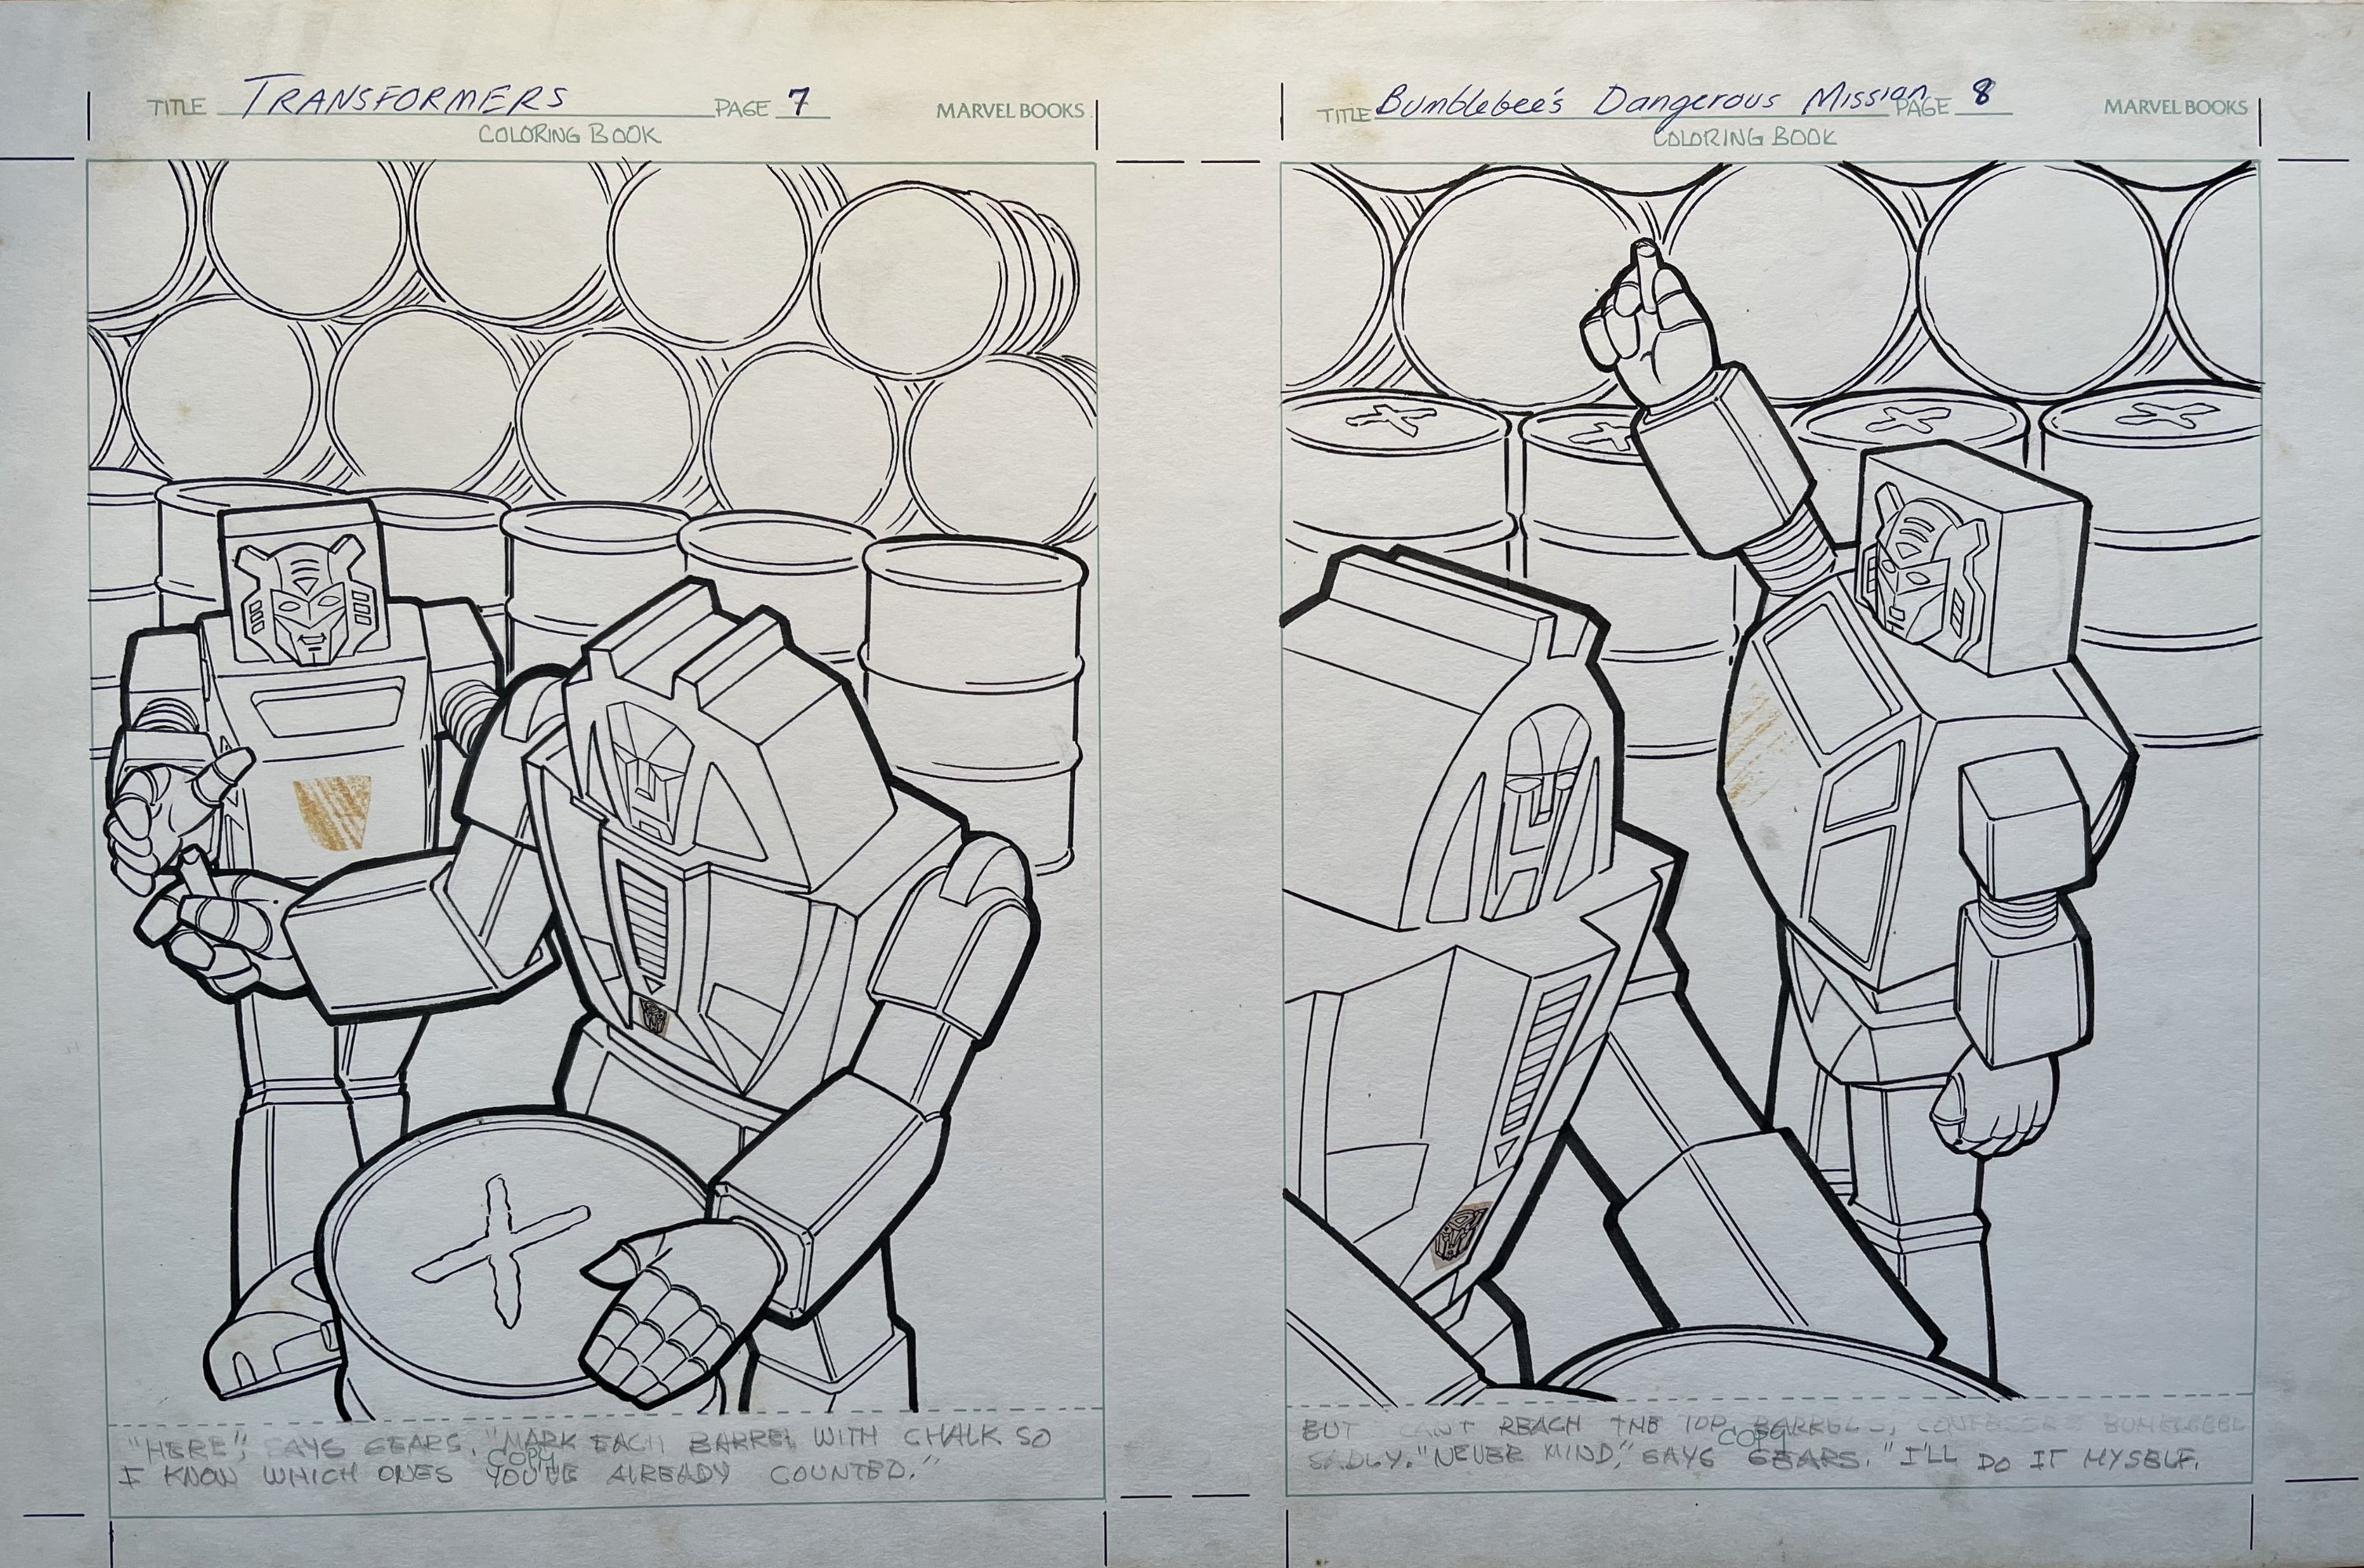 Download Transformers Bumblebee S Dangerous Mission Pgs 7 And 8 In Frank Giella S Transformers Coloring Book Art 1984 Part 2 Comic Art Gallery Room